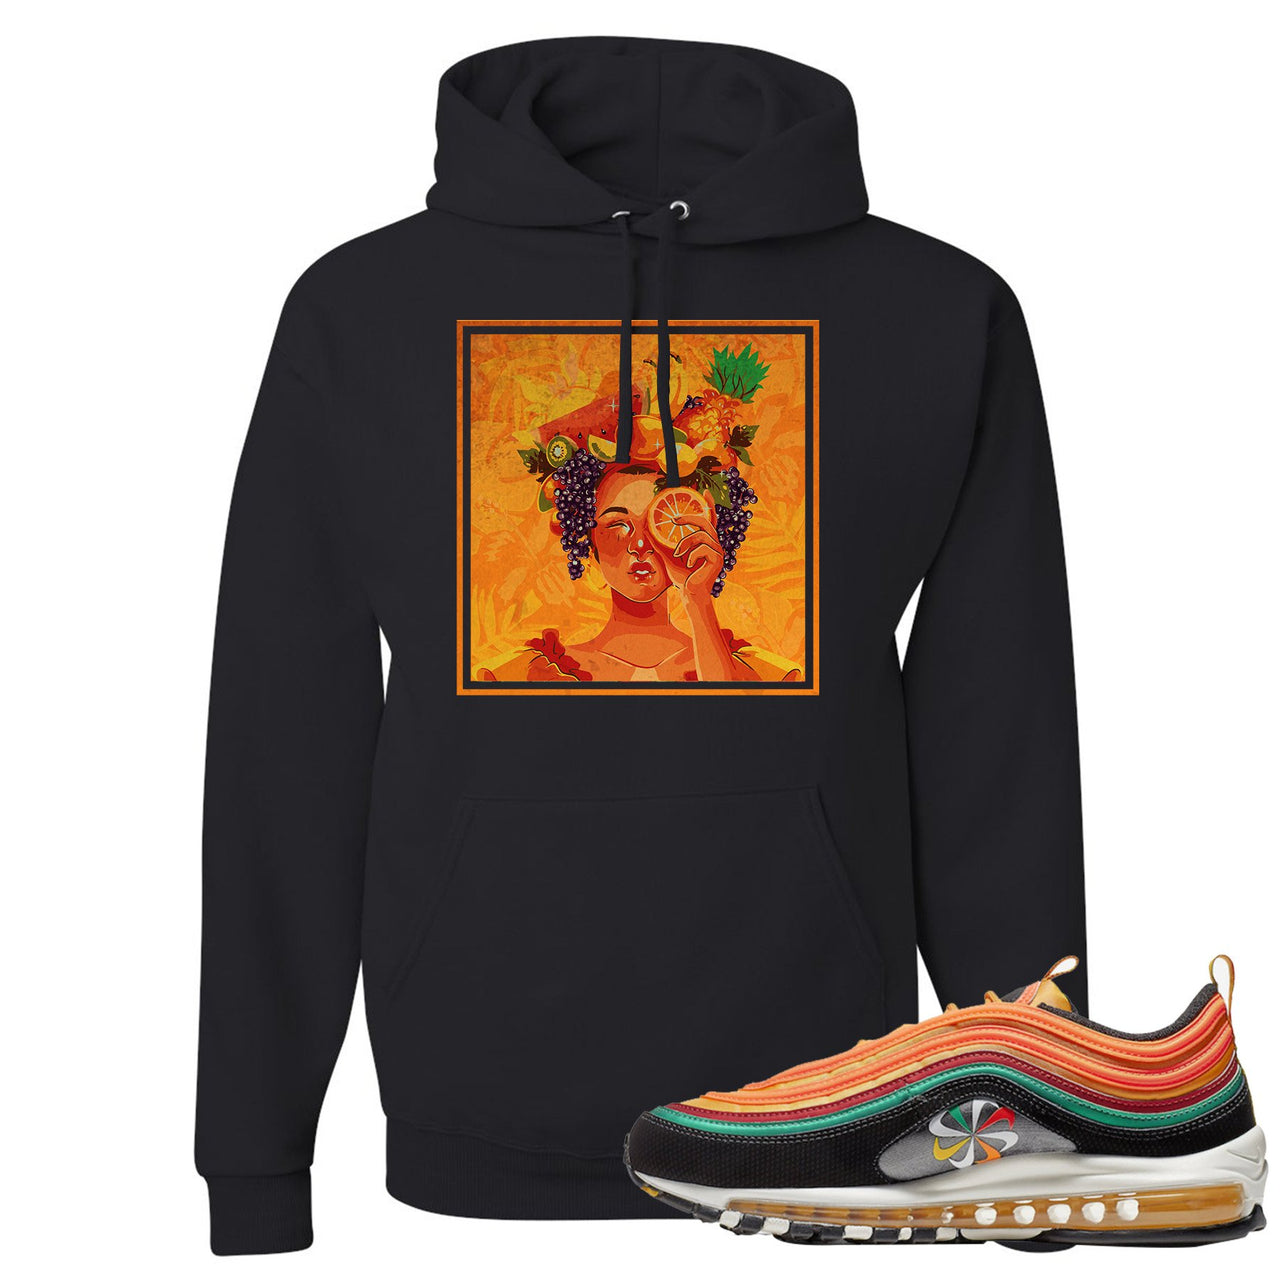 Printed on the front of the Air Max 97 Sunburst black sneaker matching pullover hoodie is the Lady Fruit logo